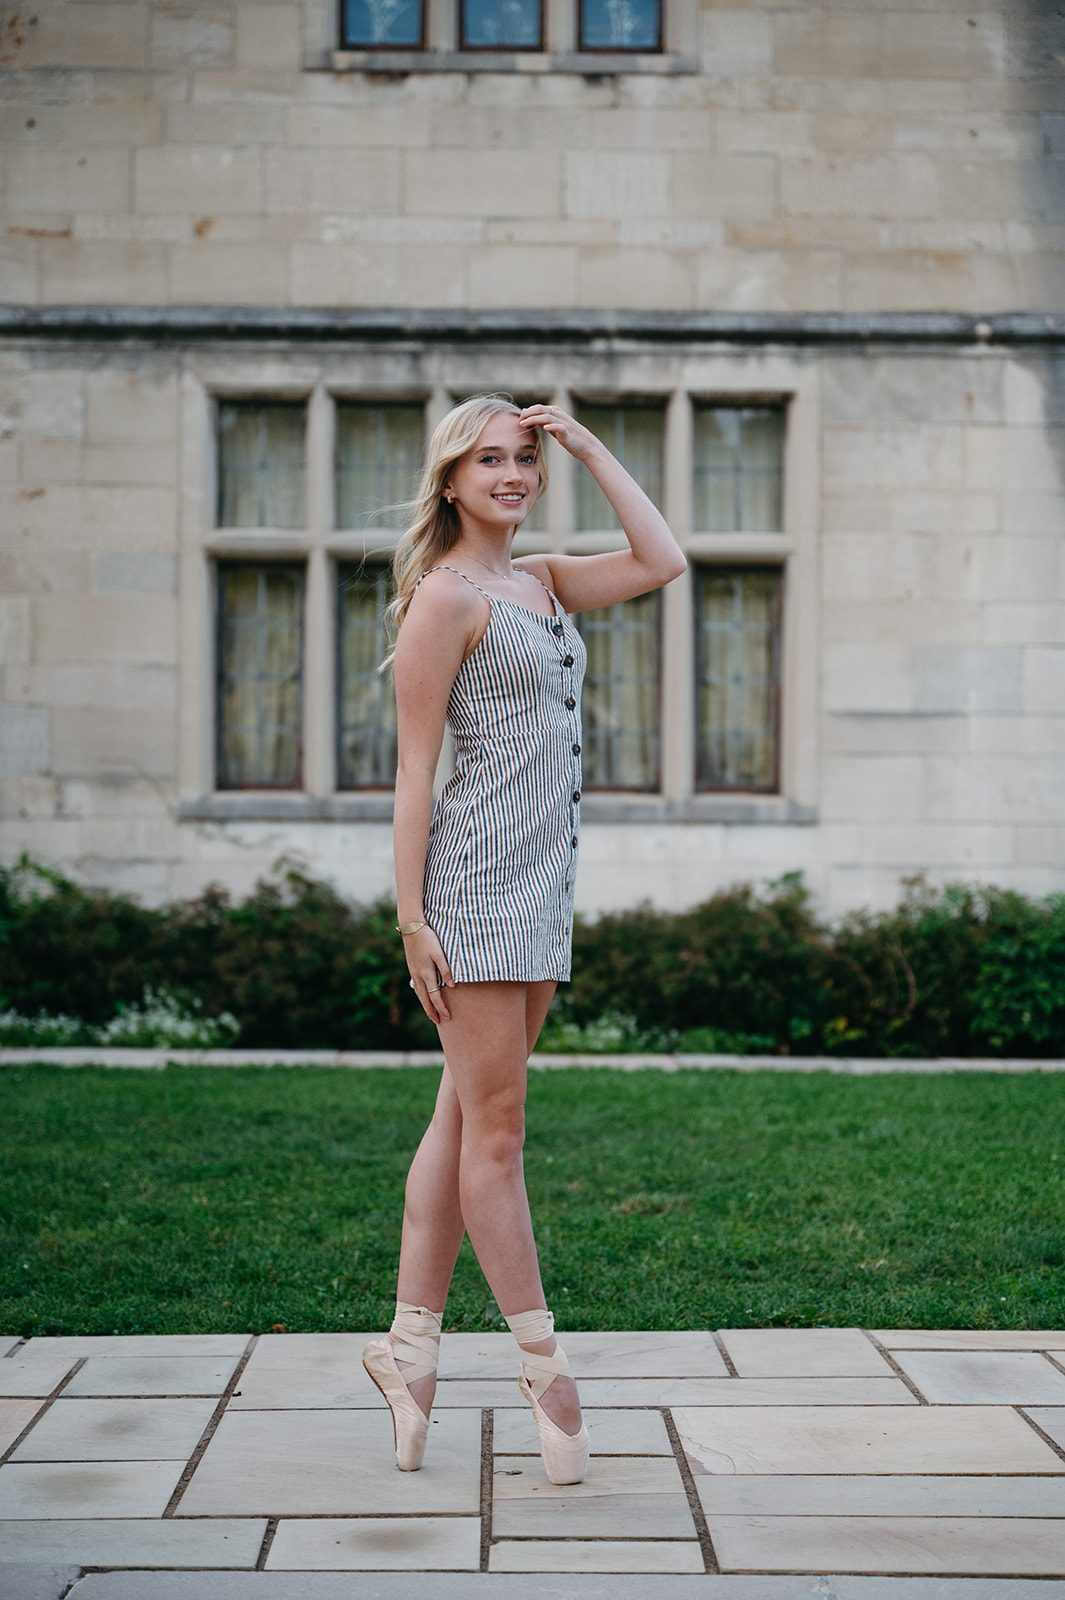 Senior portraits with girl in point ballet shoes 